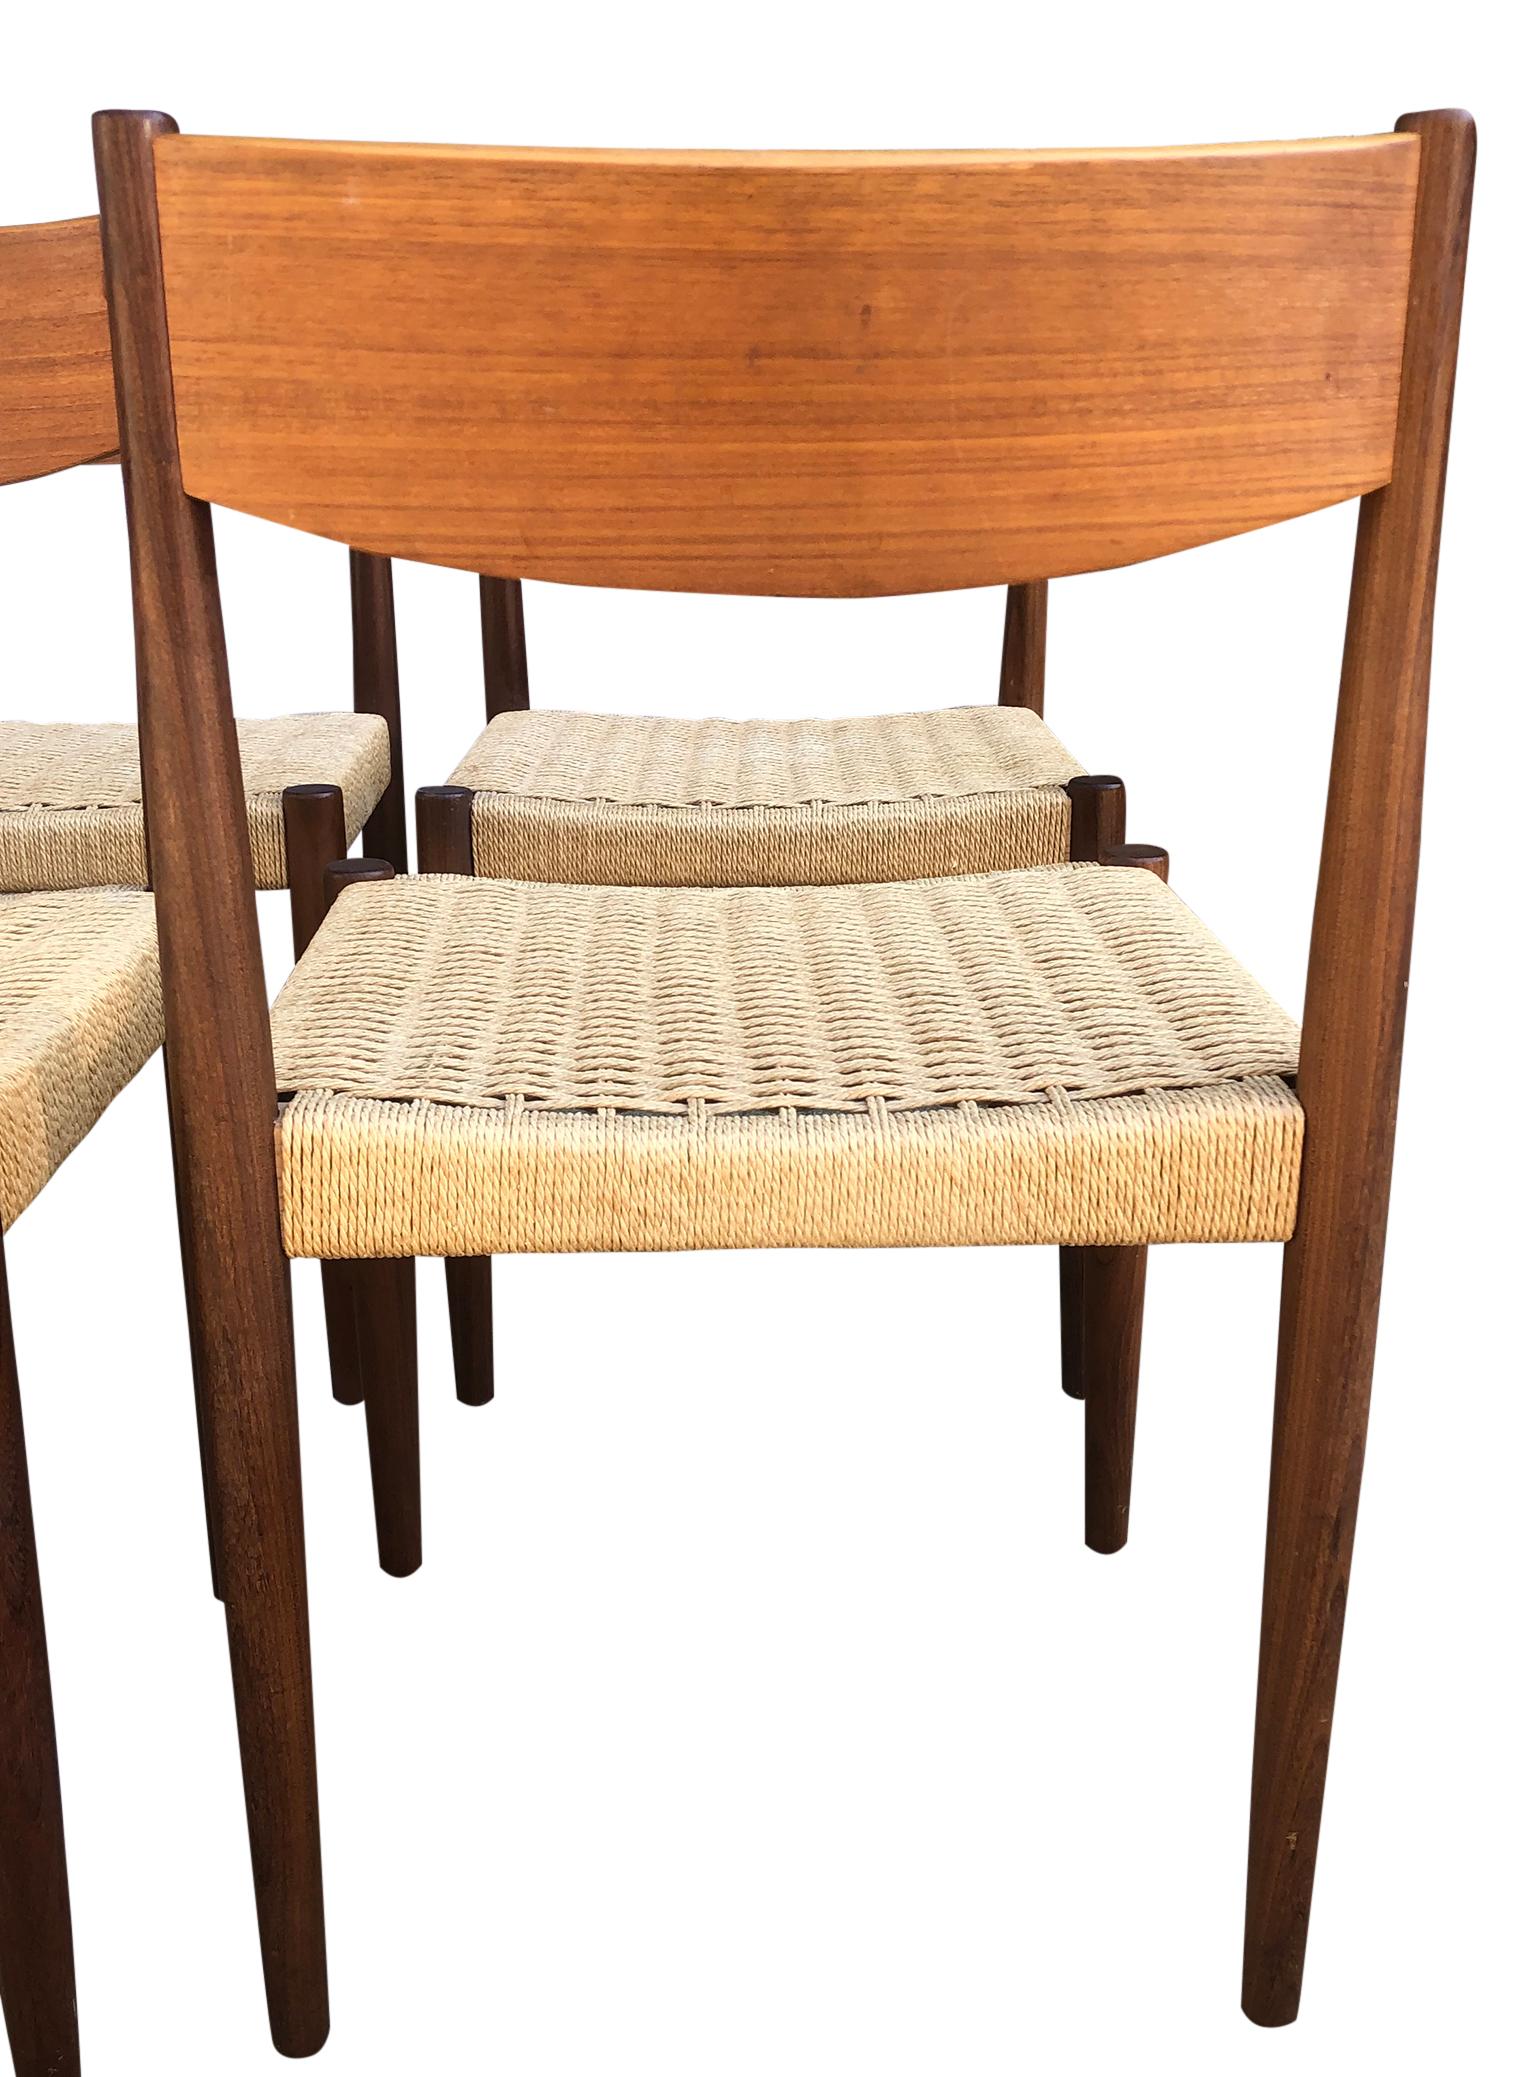 20th Century '8' Midcentury Danish Teak Papercord Dining Chairs by Poul Volther